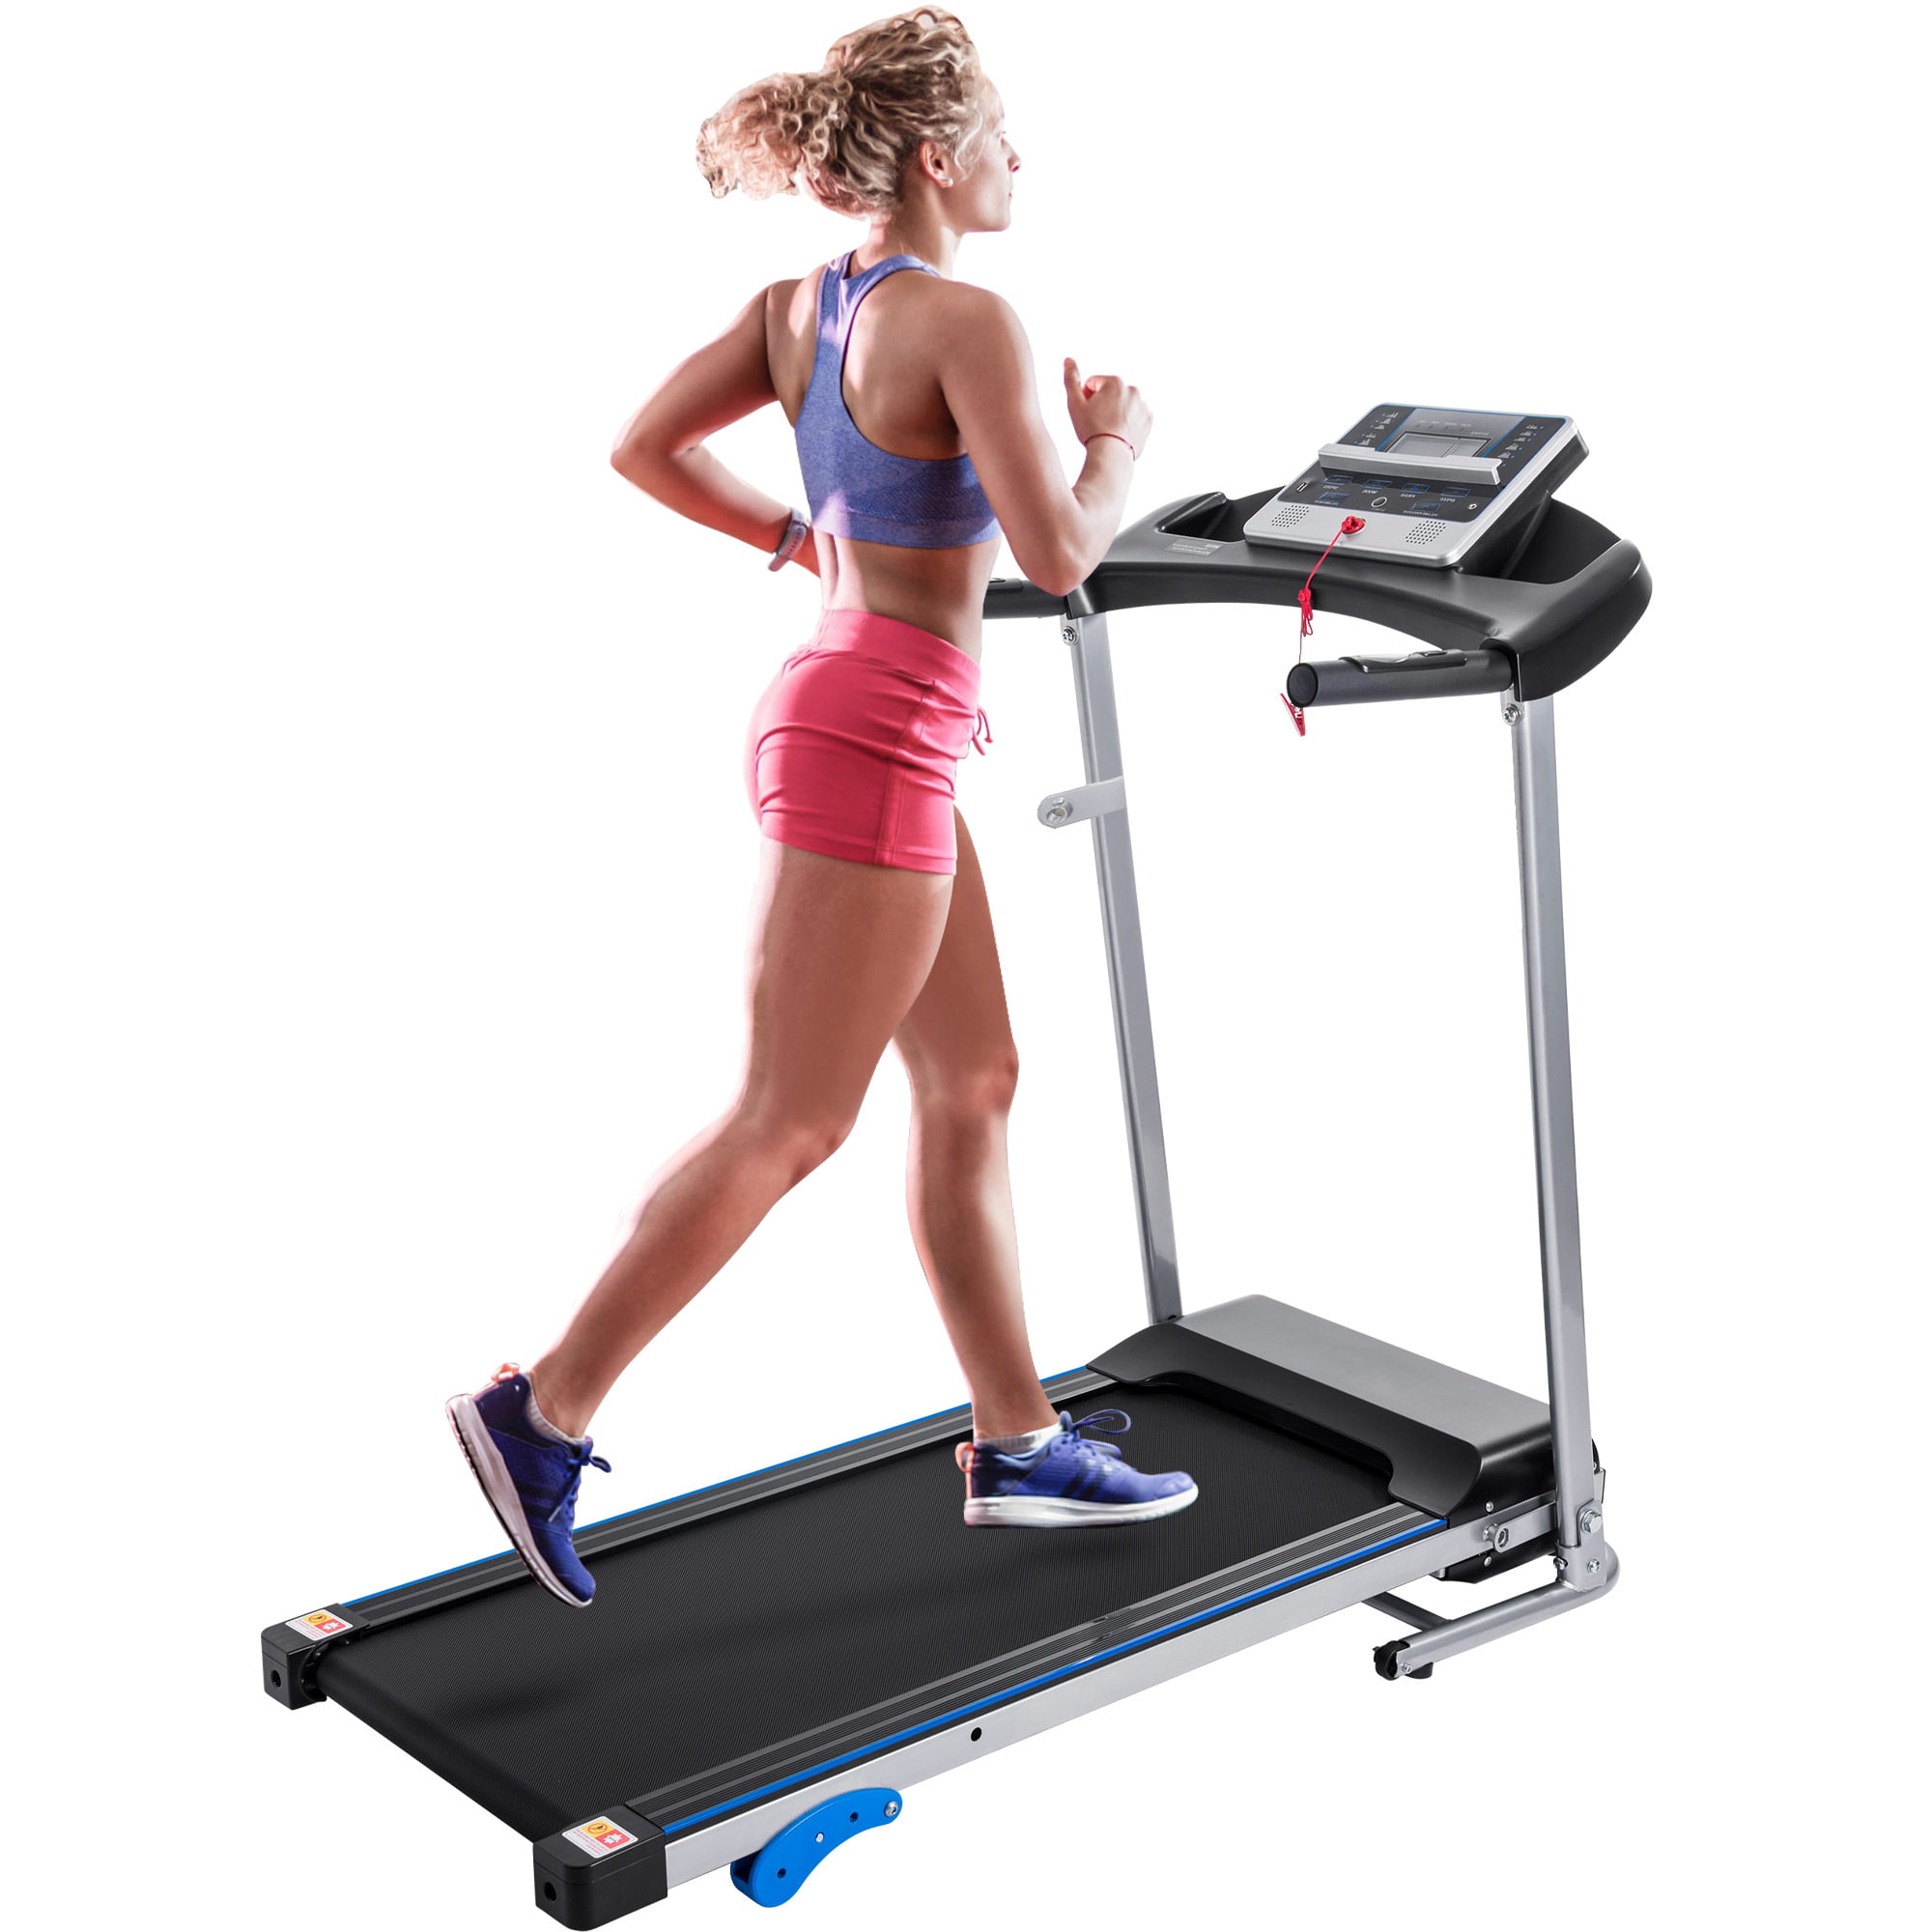 Details about   Folding Incline Electric Treadmill Running Motorized Exercise Fitness Machine US 